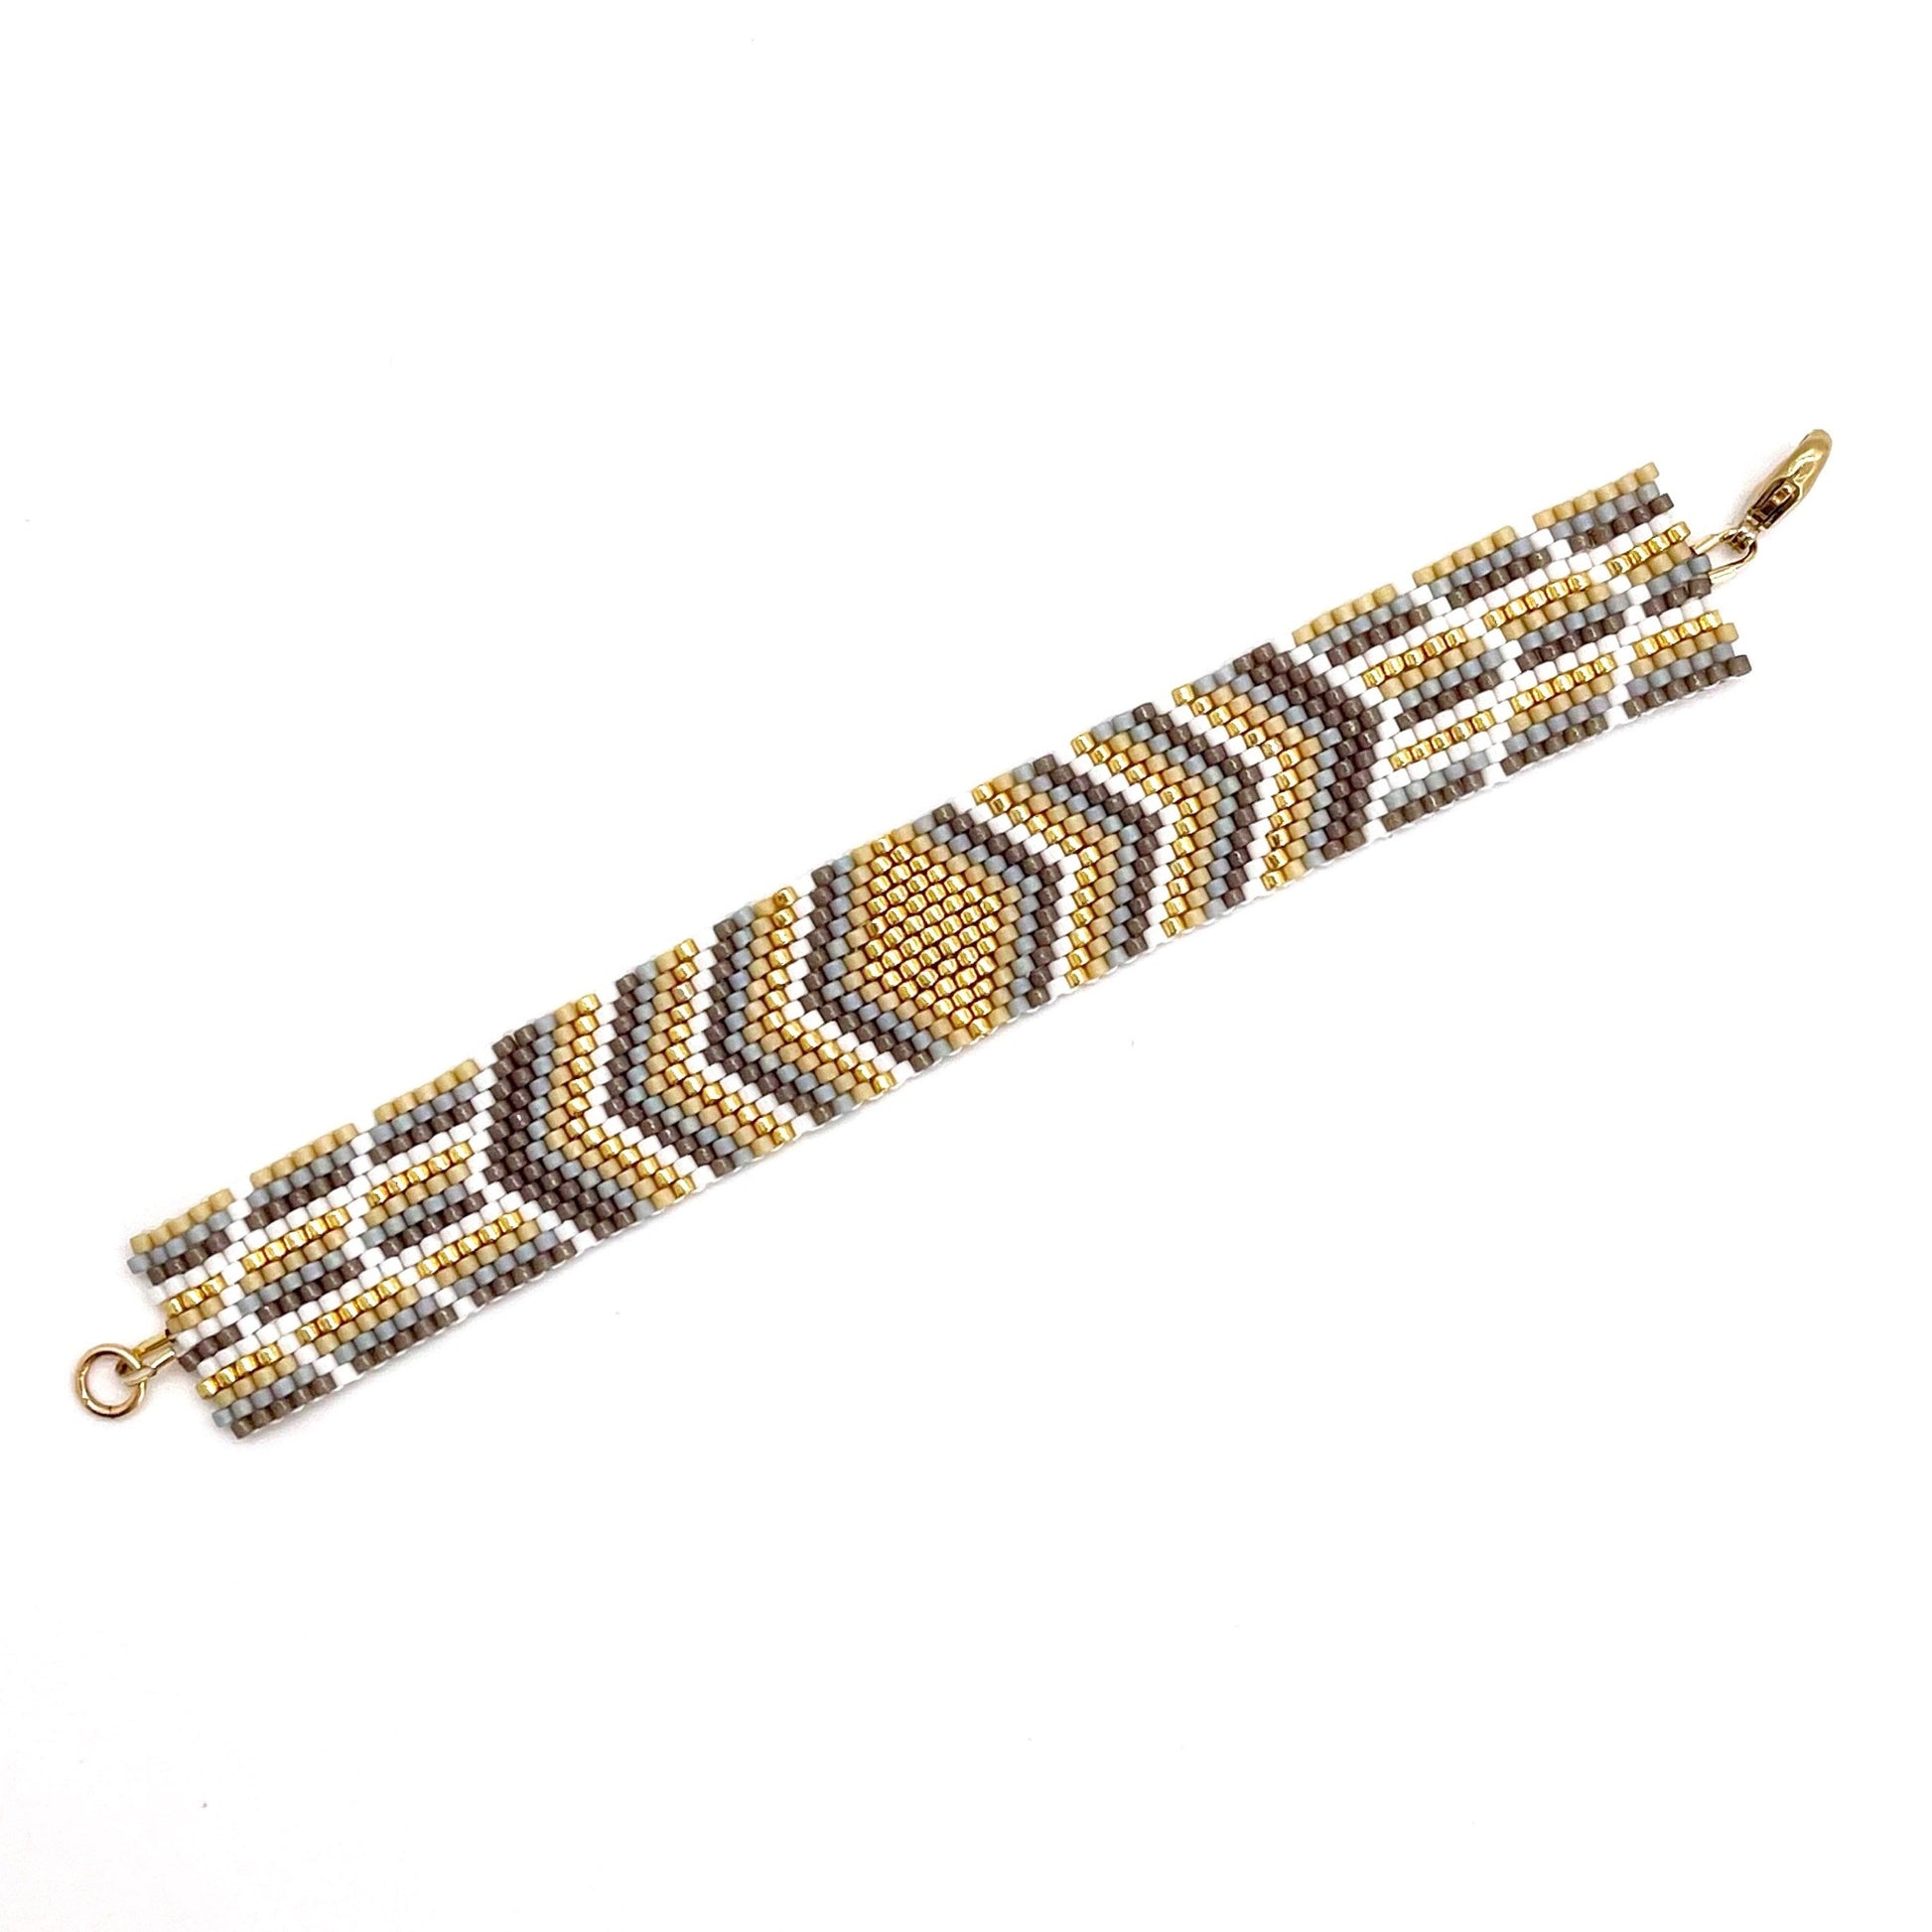 Flat beaded bracelet woven with gold, white, and tan tiny beads. A fun and stylish beach or pool accessory.